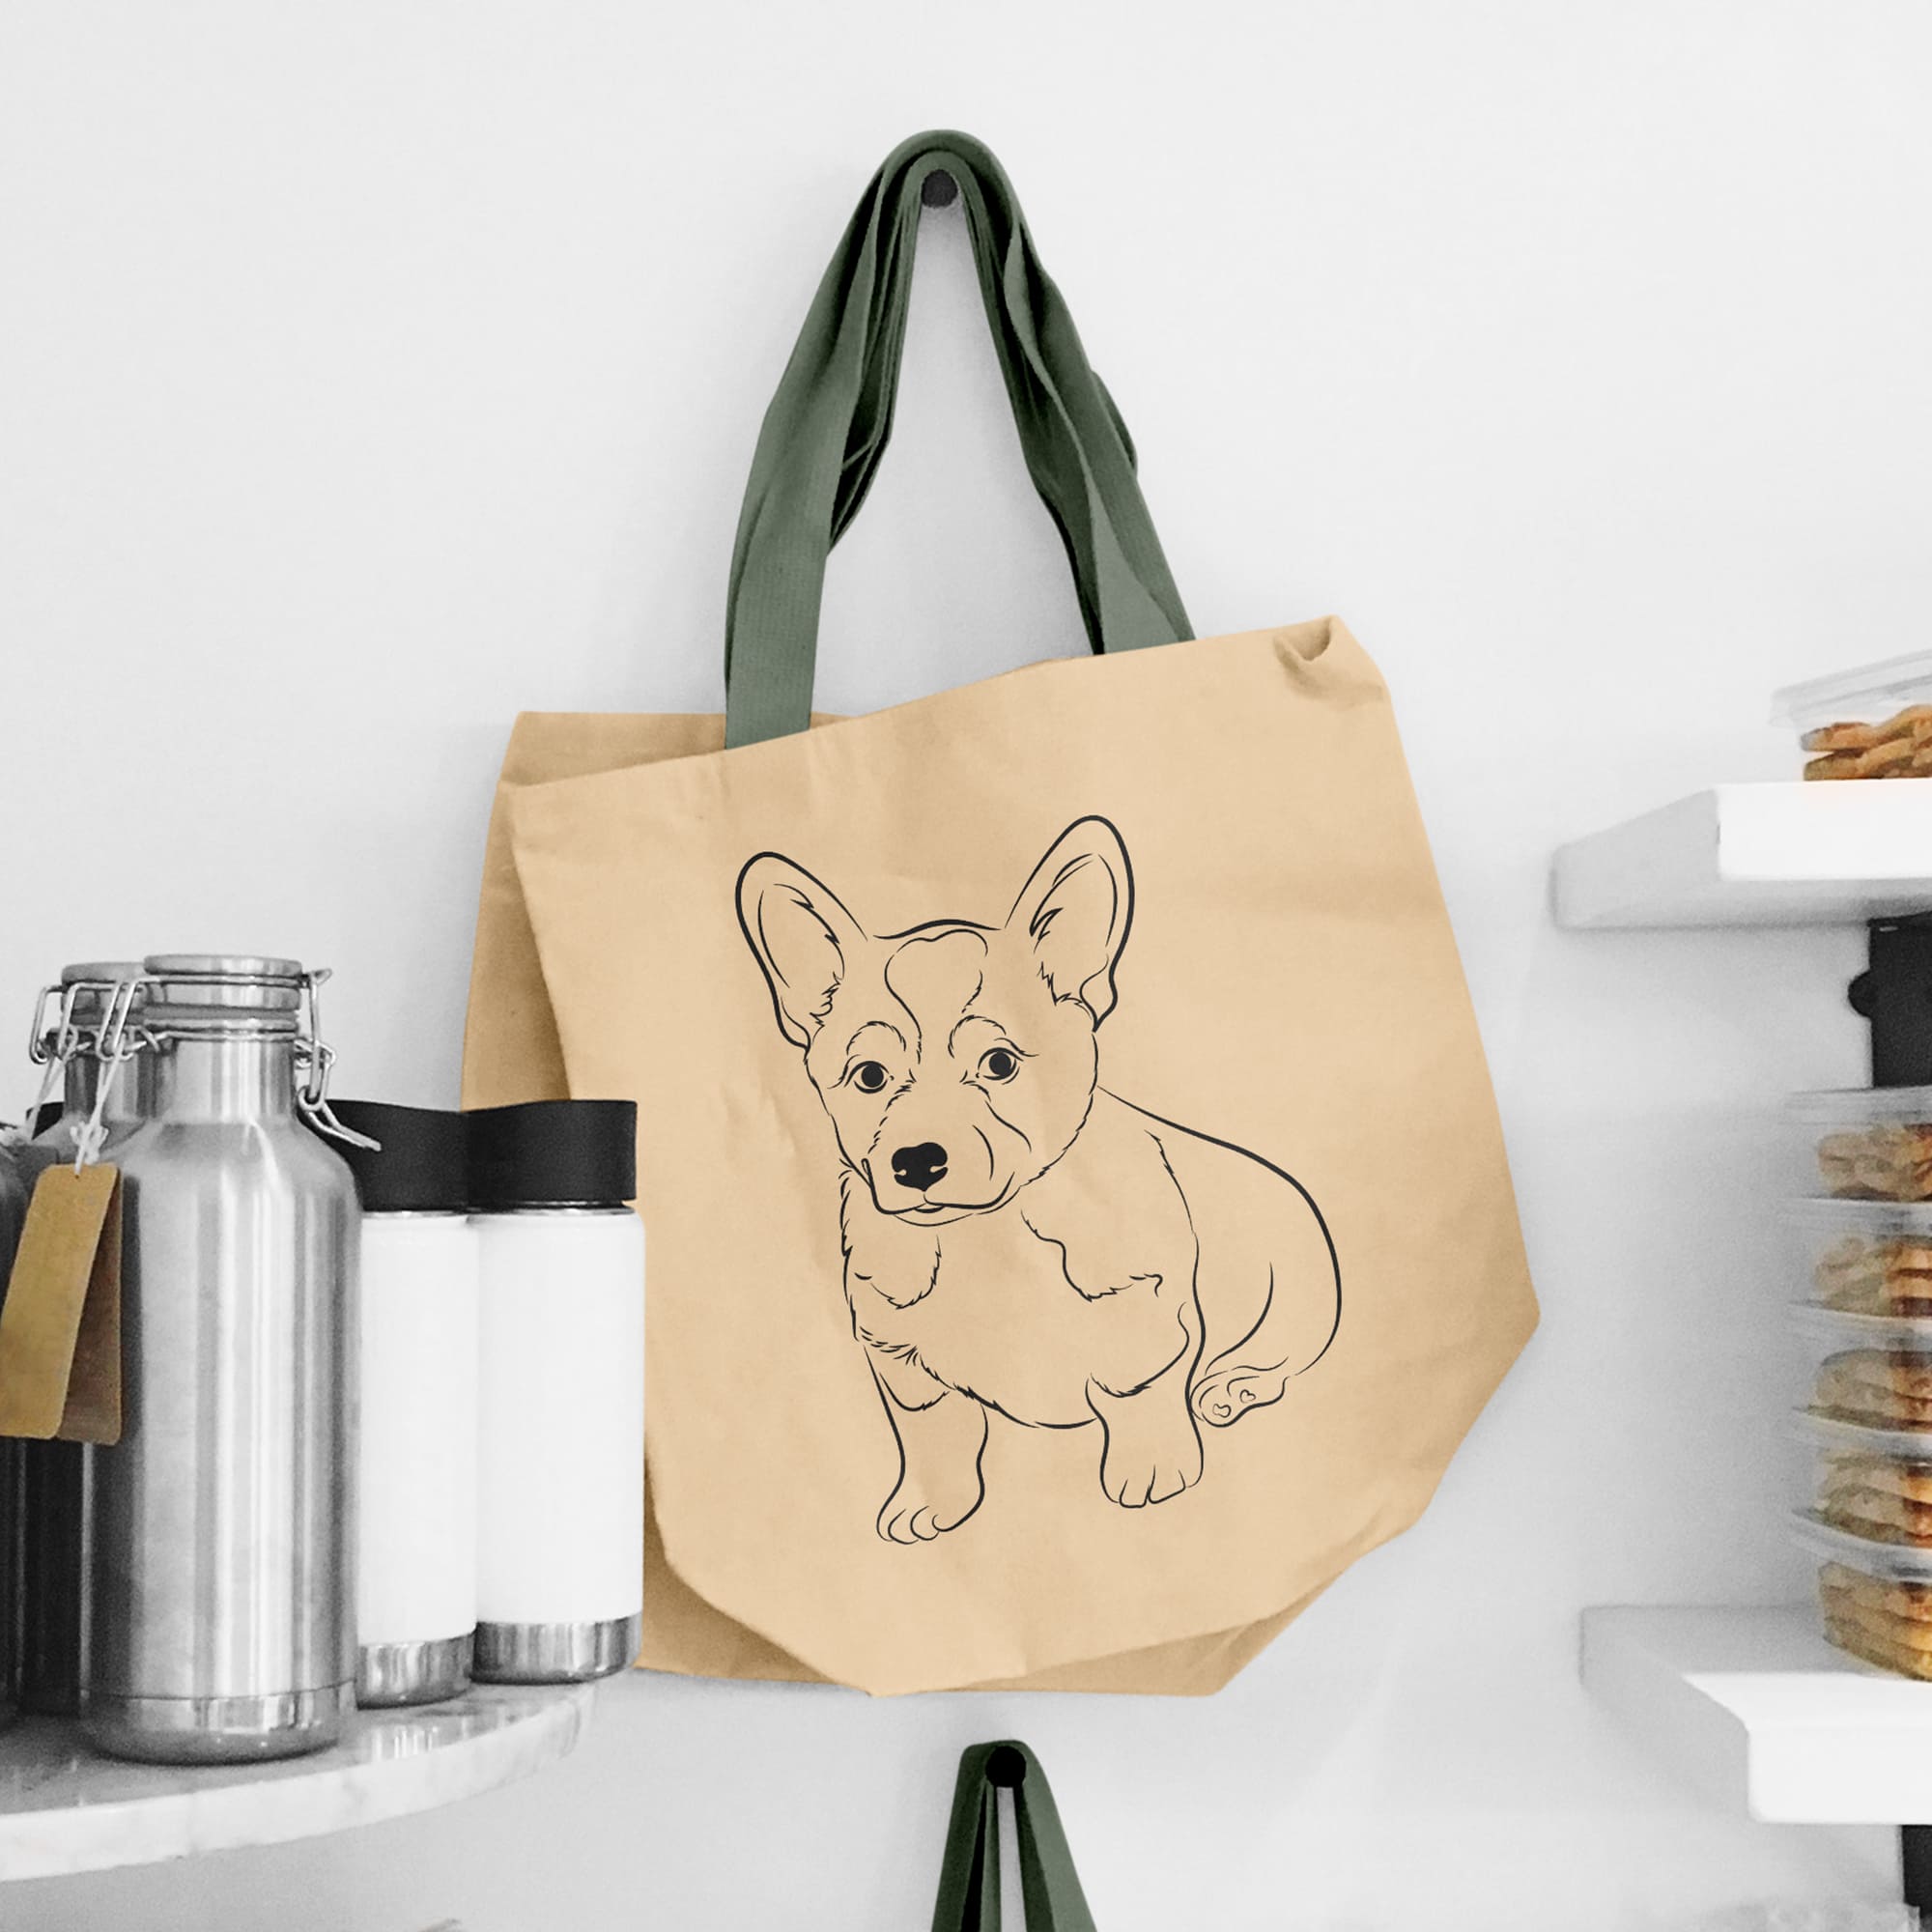 Brown bag with a picture of a dog on it.